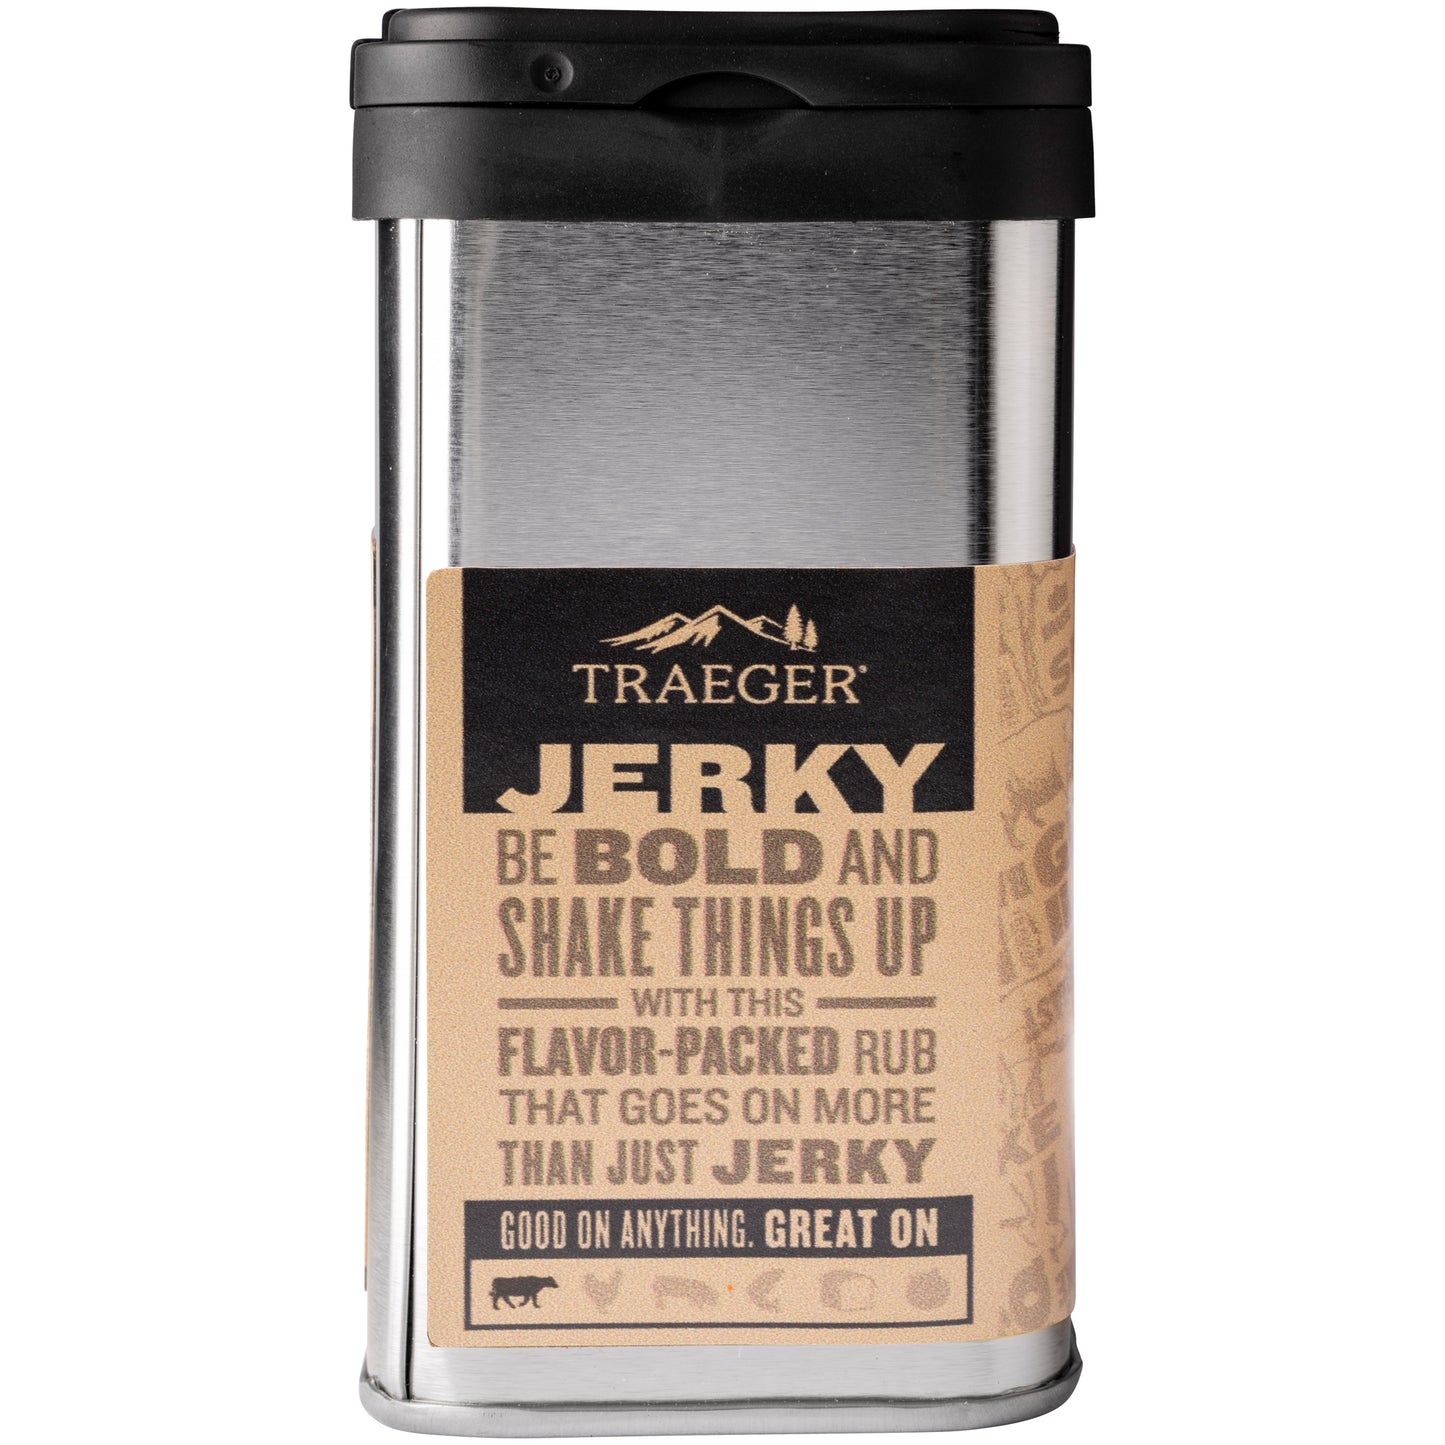 Great for homemade beef jerky.